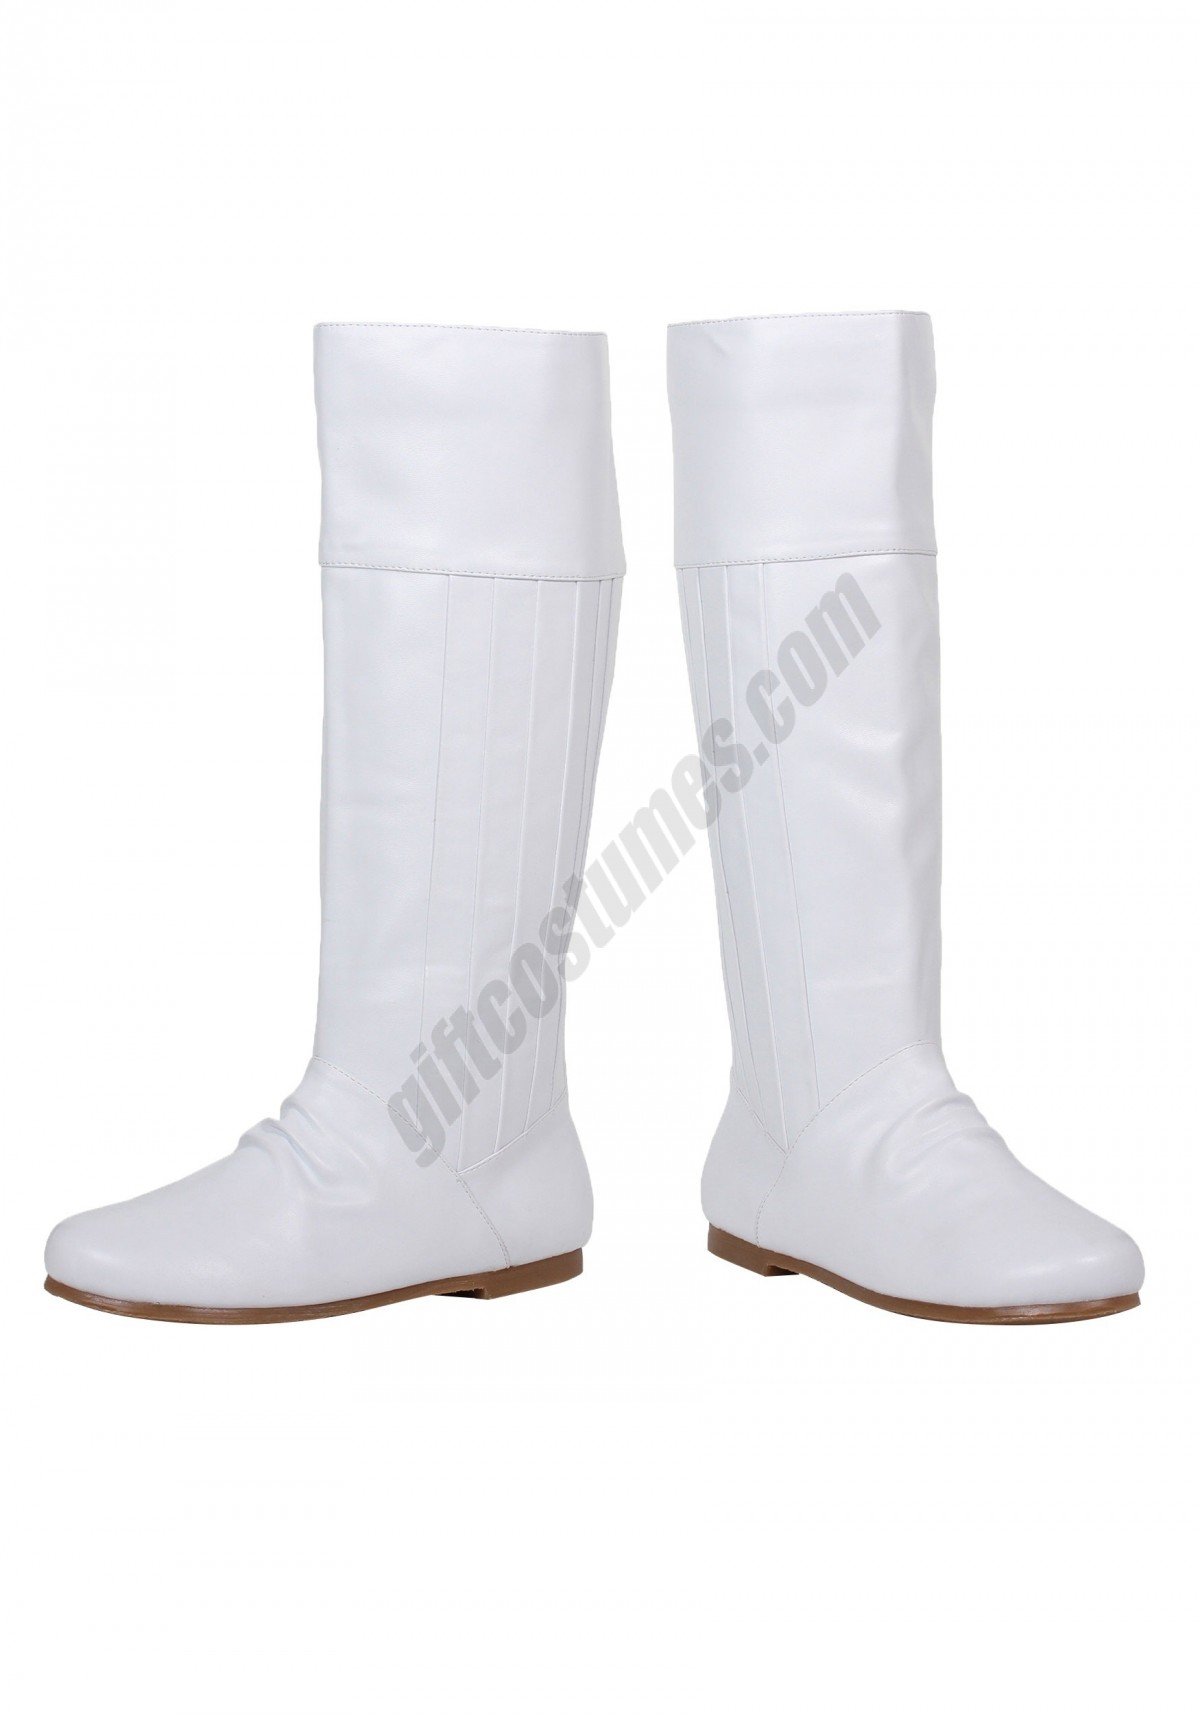 White Princess Boots Promotions - -0